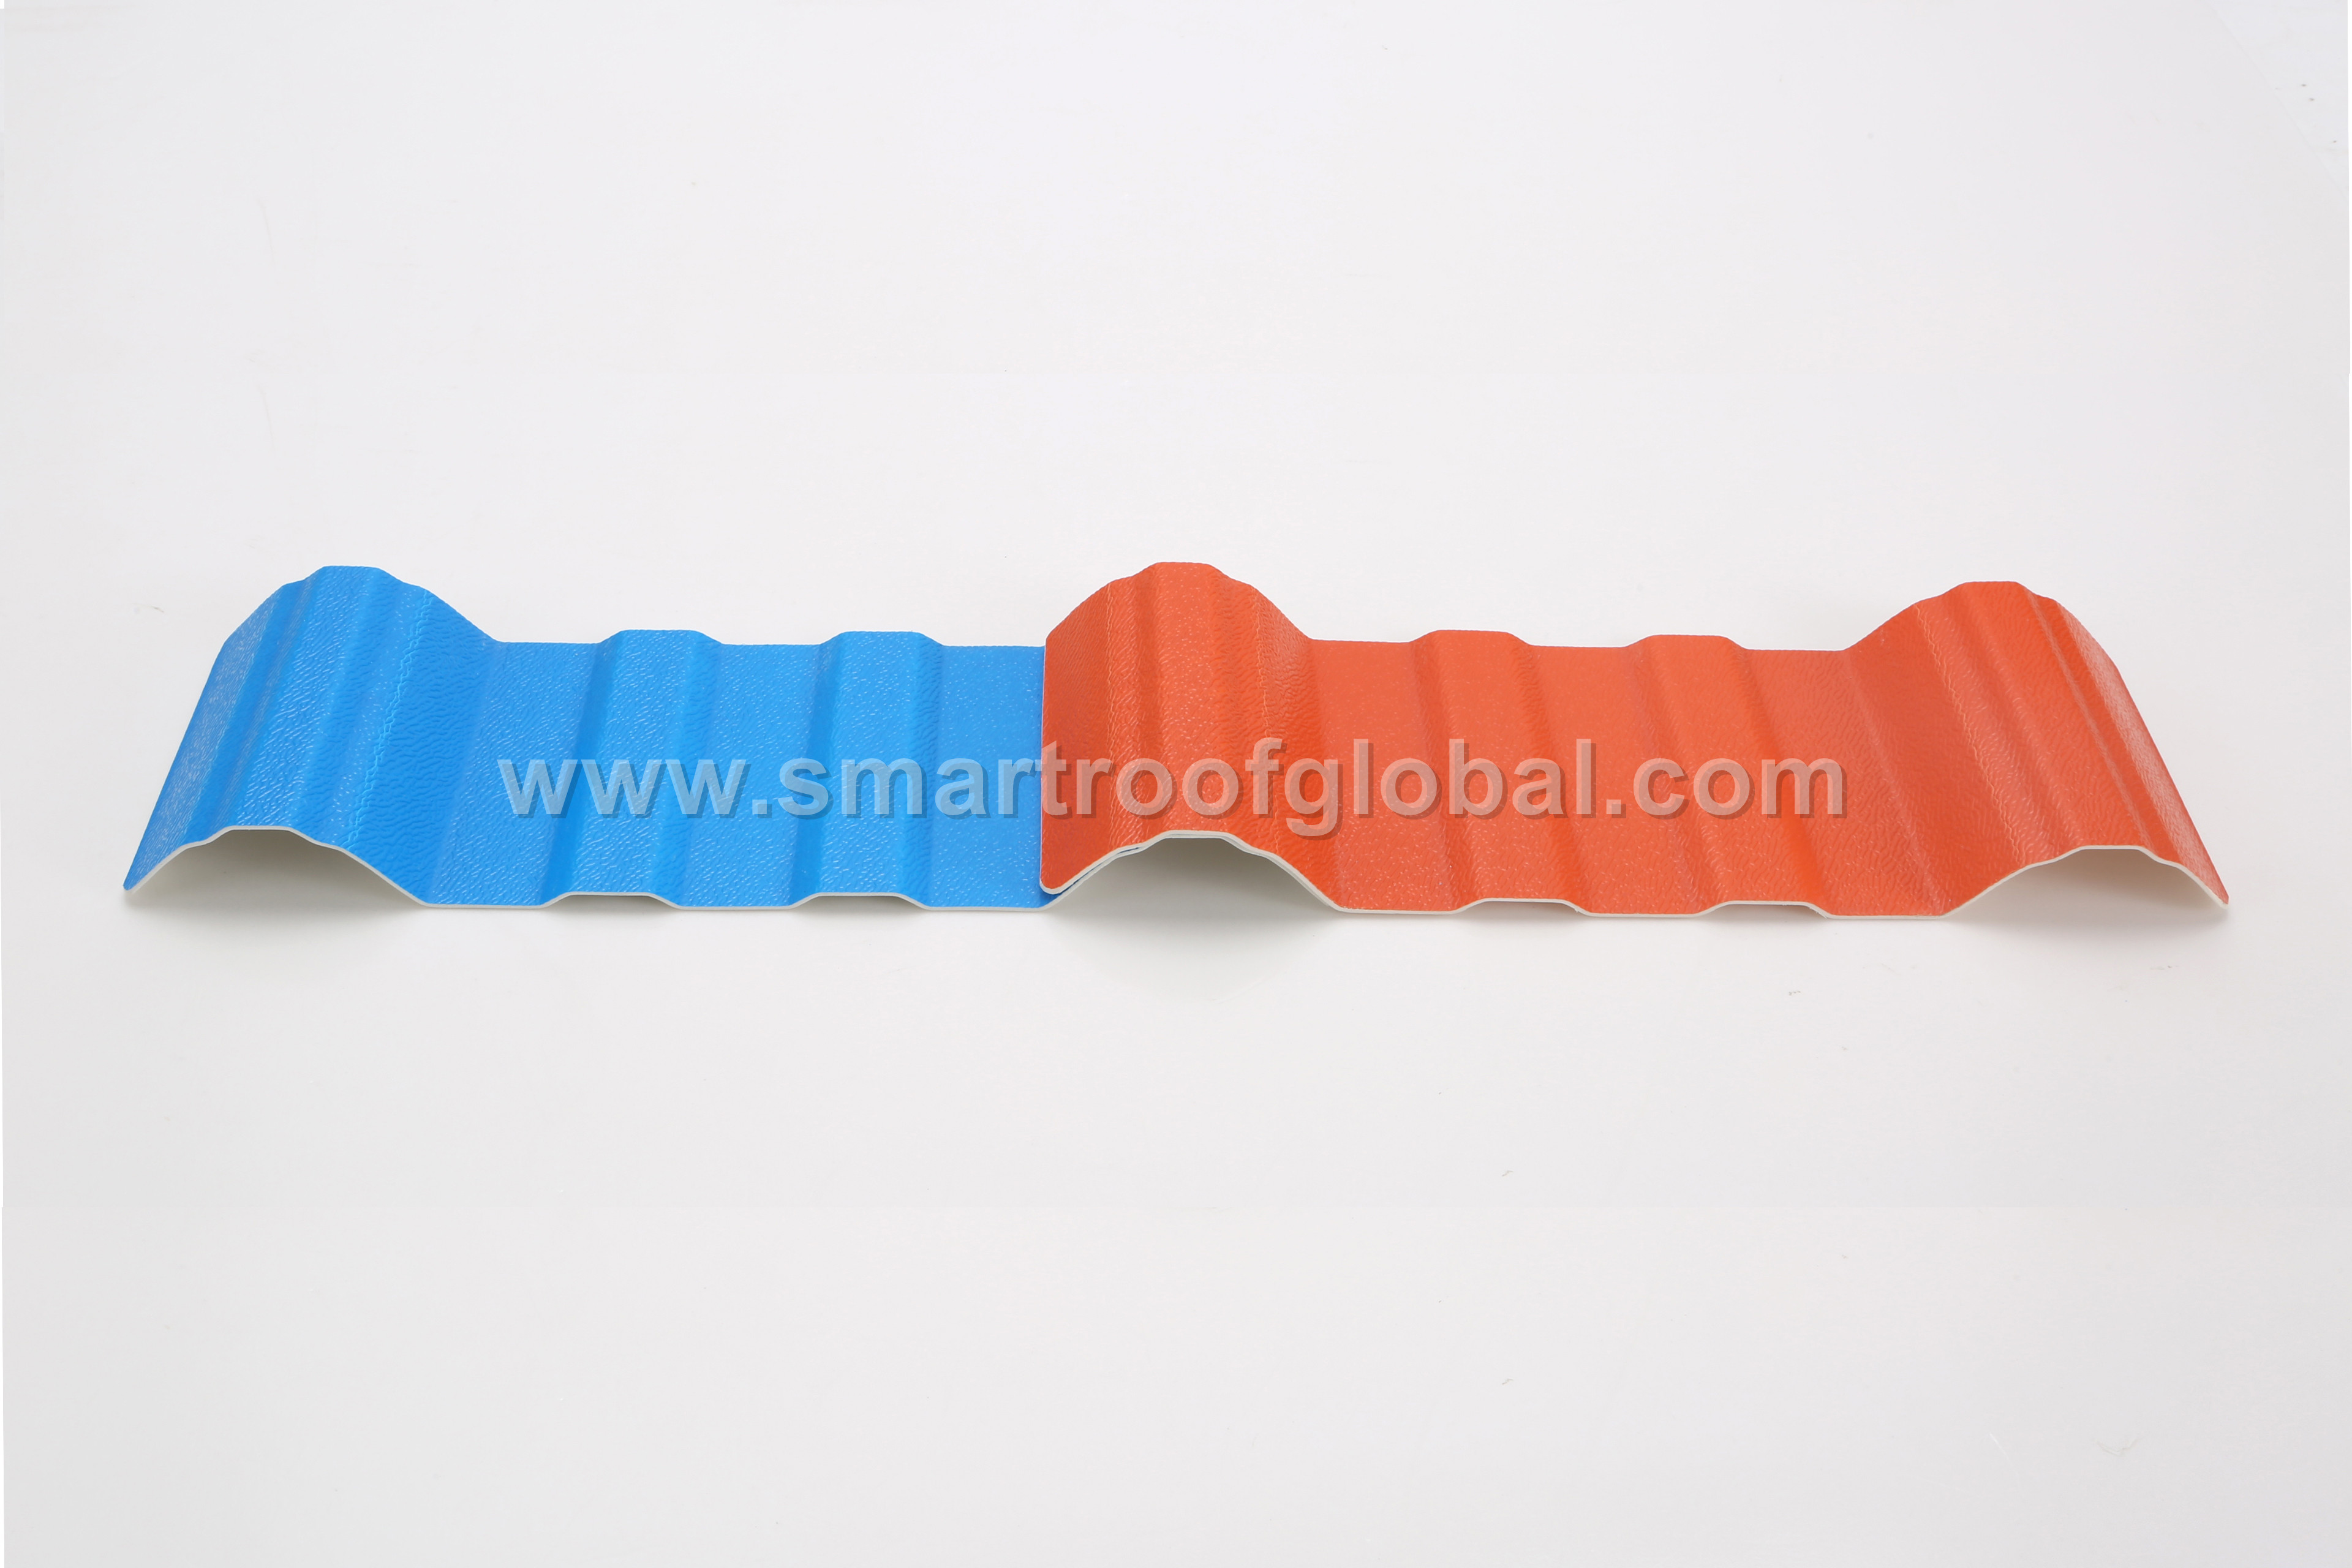 Wholesale Dealers of Resin Roofing - Corrugated Plastic Panels – Smartroof